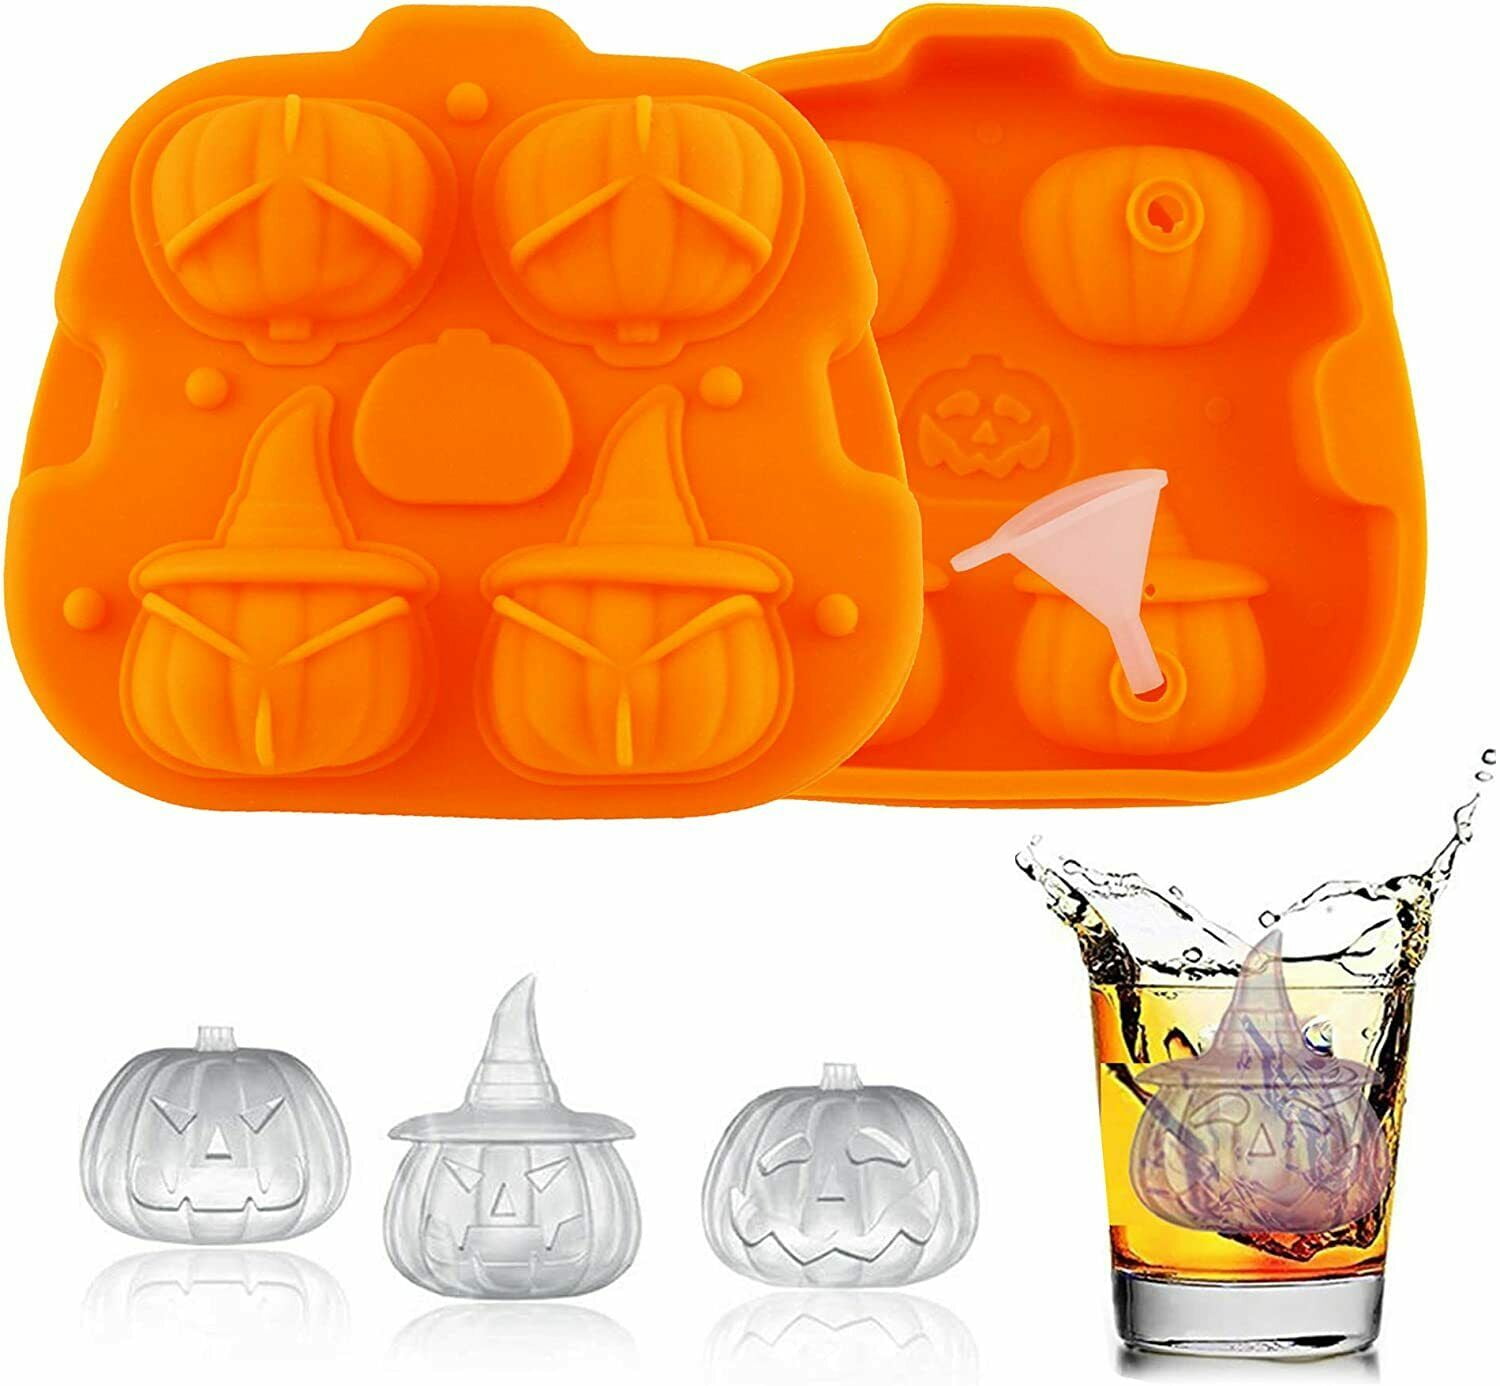 MICKEY MOUSE PUMPKIN Silicone Cake or Jelly Mould Halloween 